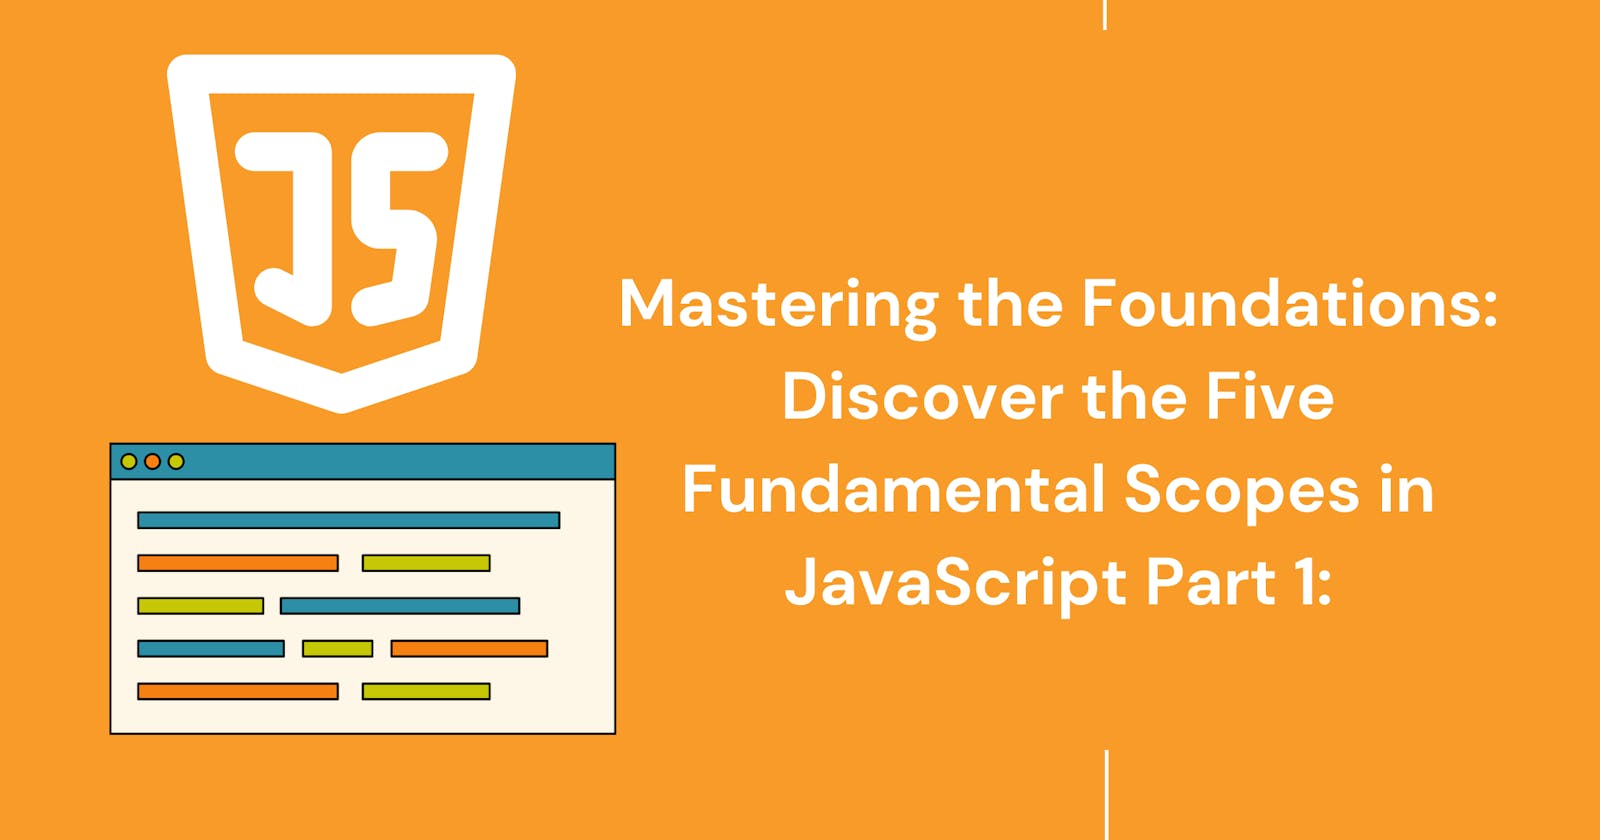 Mastering the Foundations: Discover the Five Fundamental Scopes in JavaScript, Part 1: